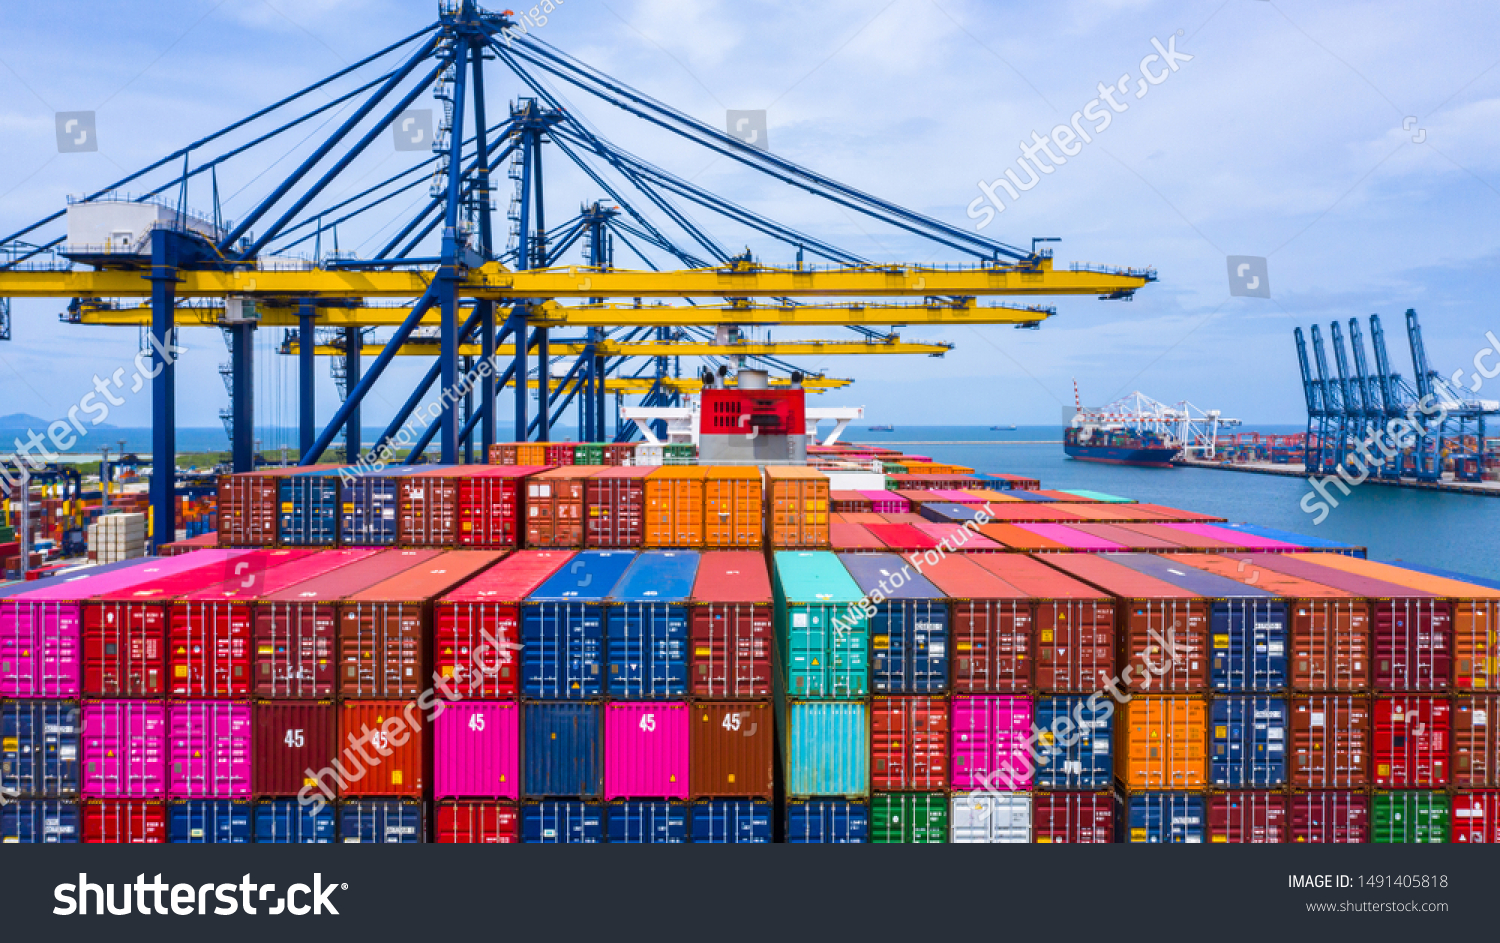 Container ship loading and unloading in sea port, Aerial view of business logistic import and export freight  transportation by container ship in harbor, Container loading Cargo freight ship, Dubai.